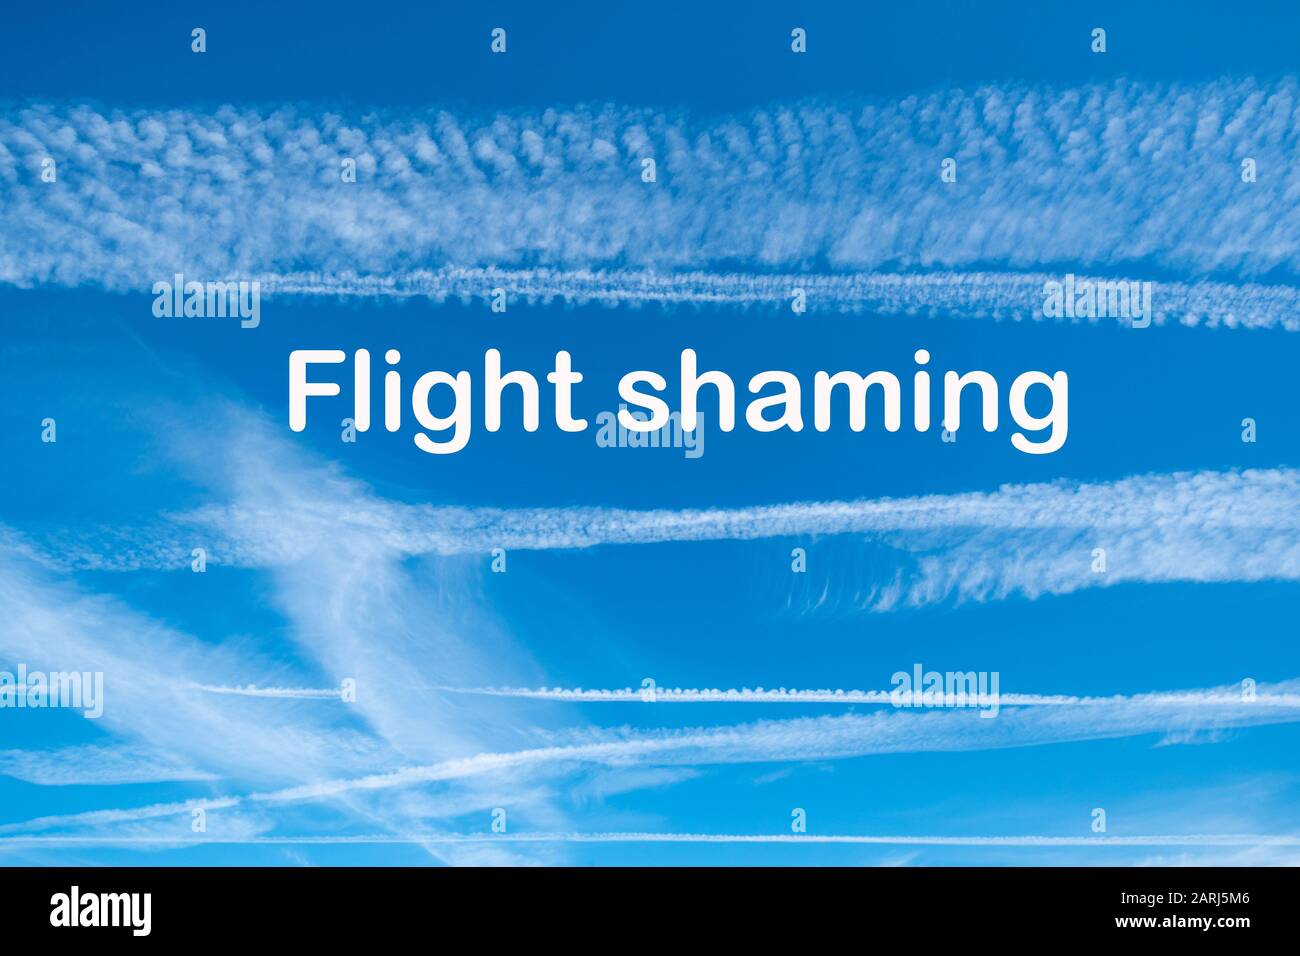 Climate change concept image with blue sky and vapour trails from aircraft with the words Flight Shaming Stock Photo